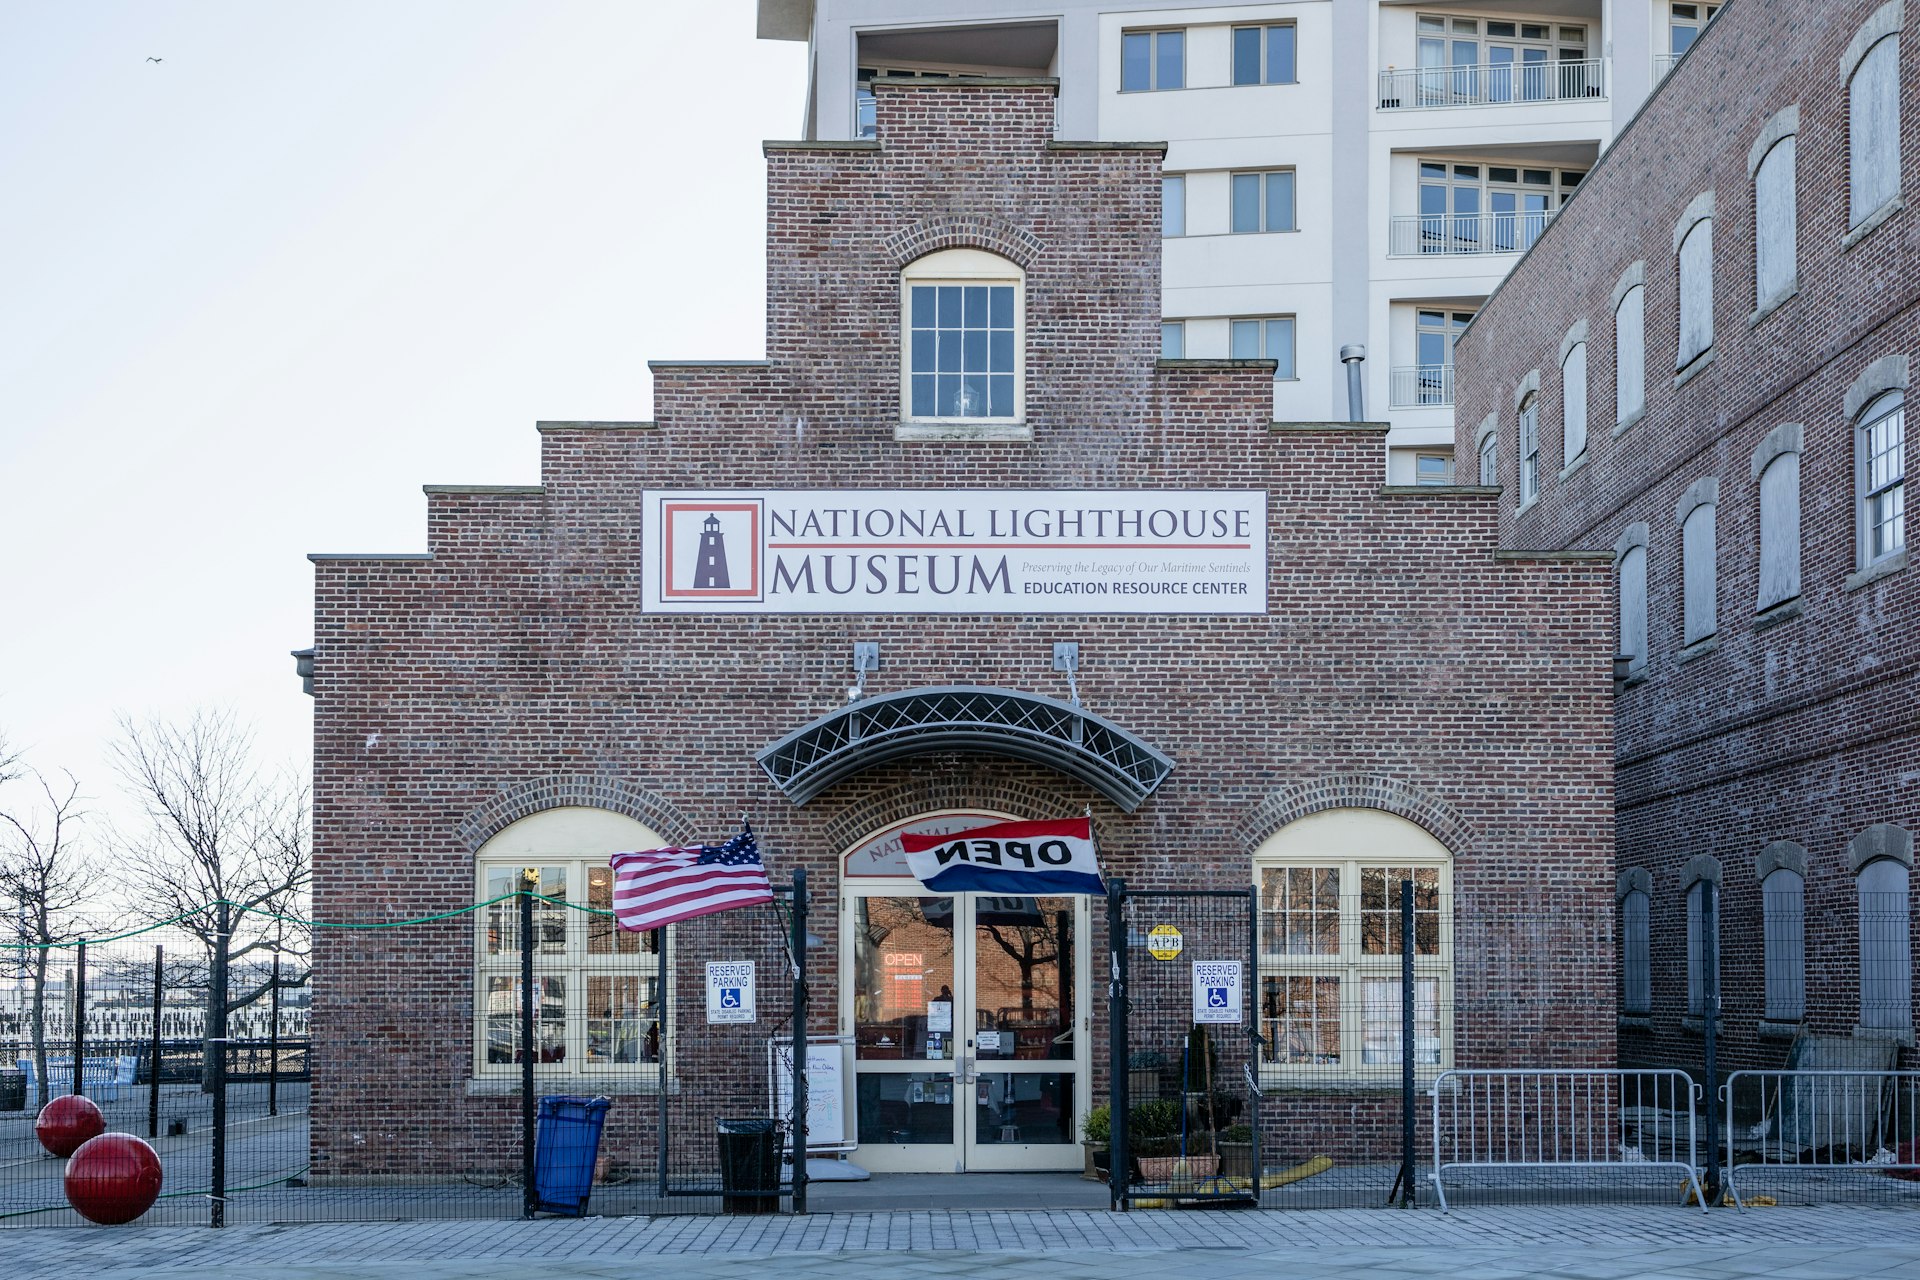 The National Lighthouse Museum